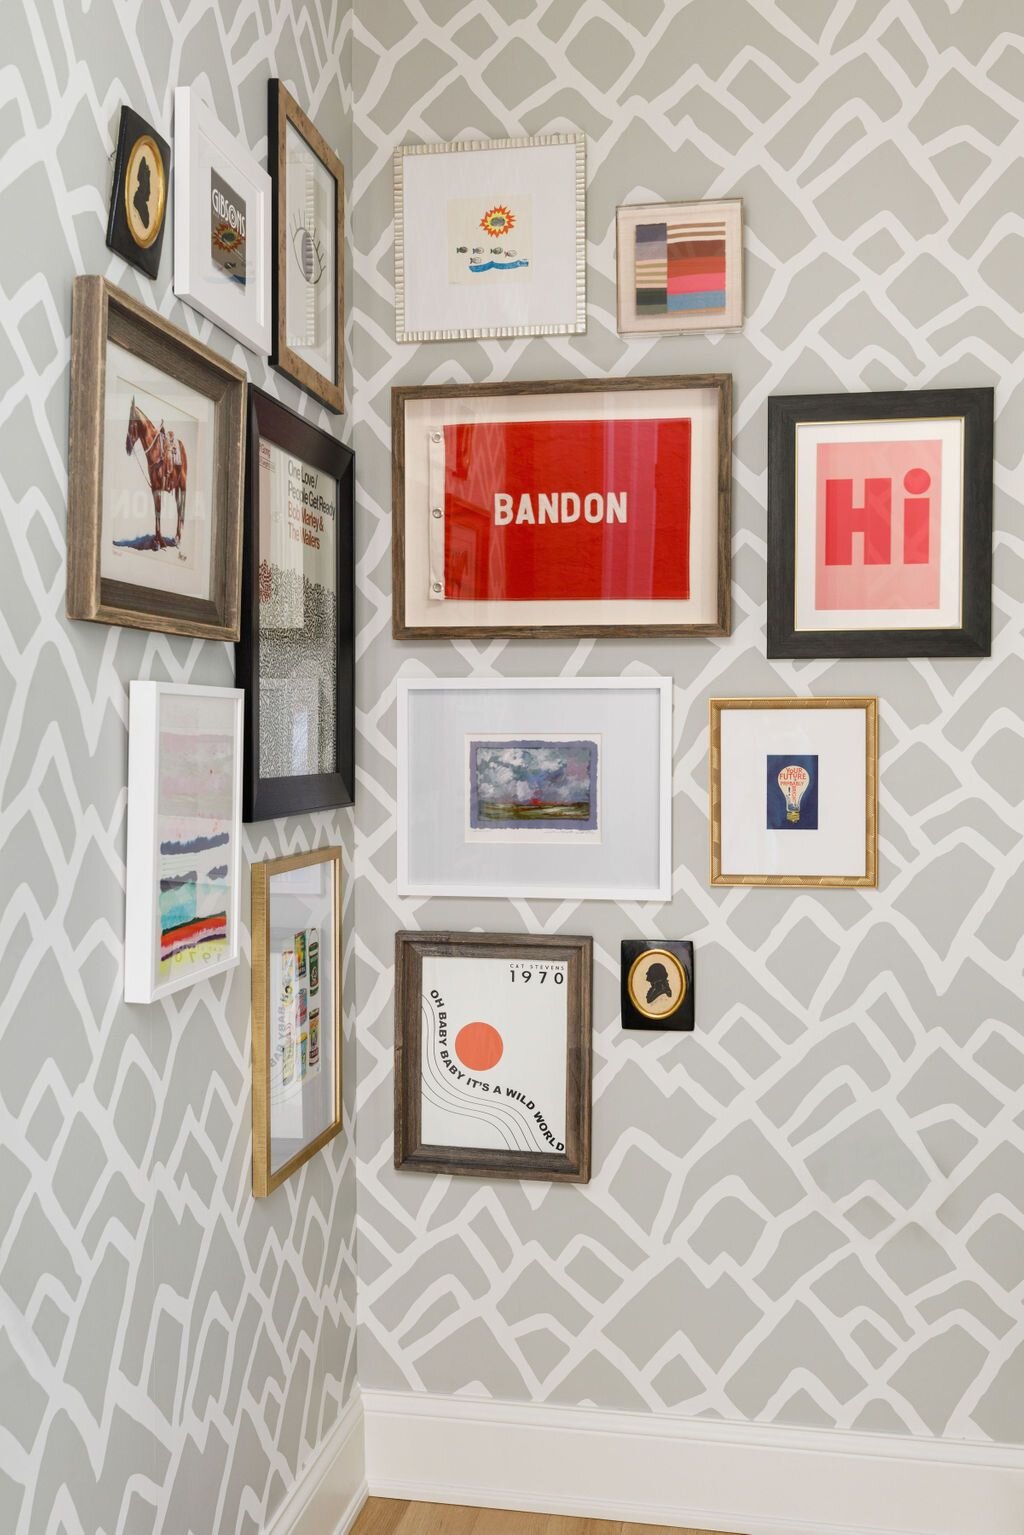 MMDH: A Powder Room With Stories To Tell Through Design